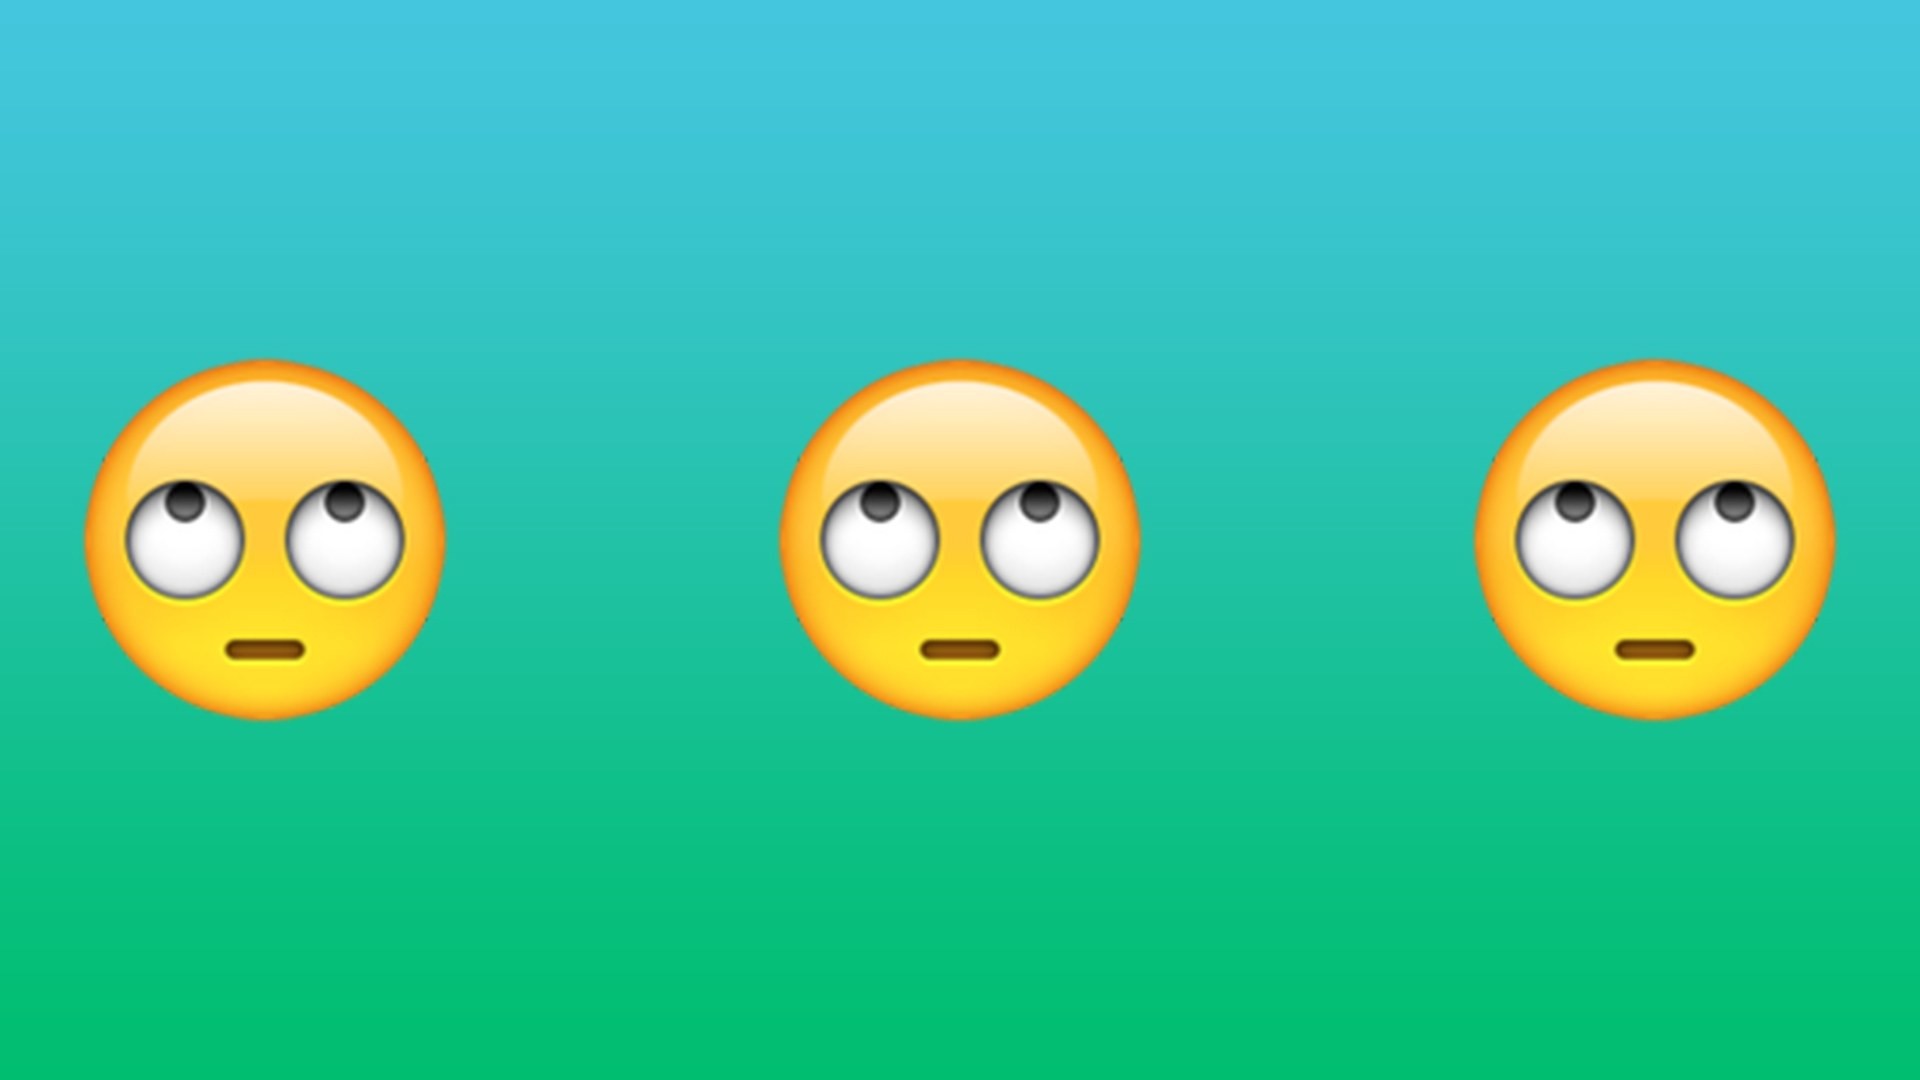 It's Hard Out There for a New Emoji